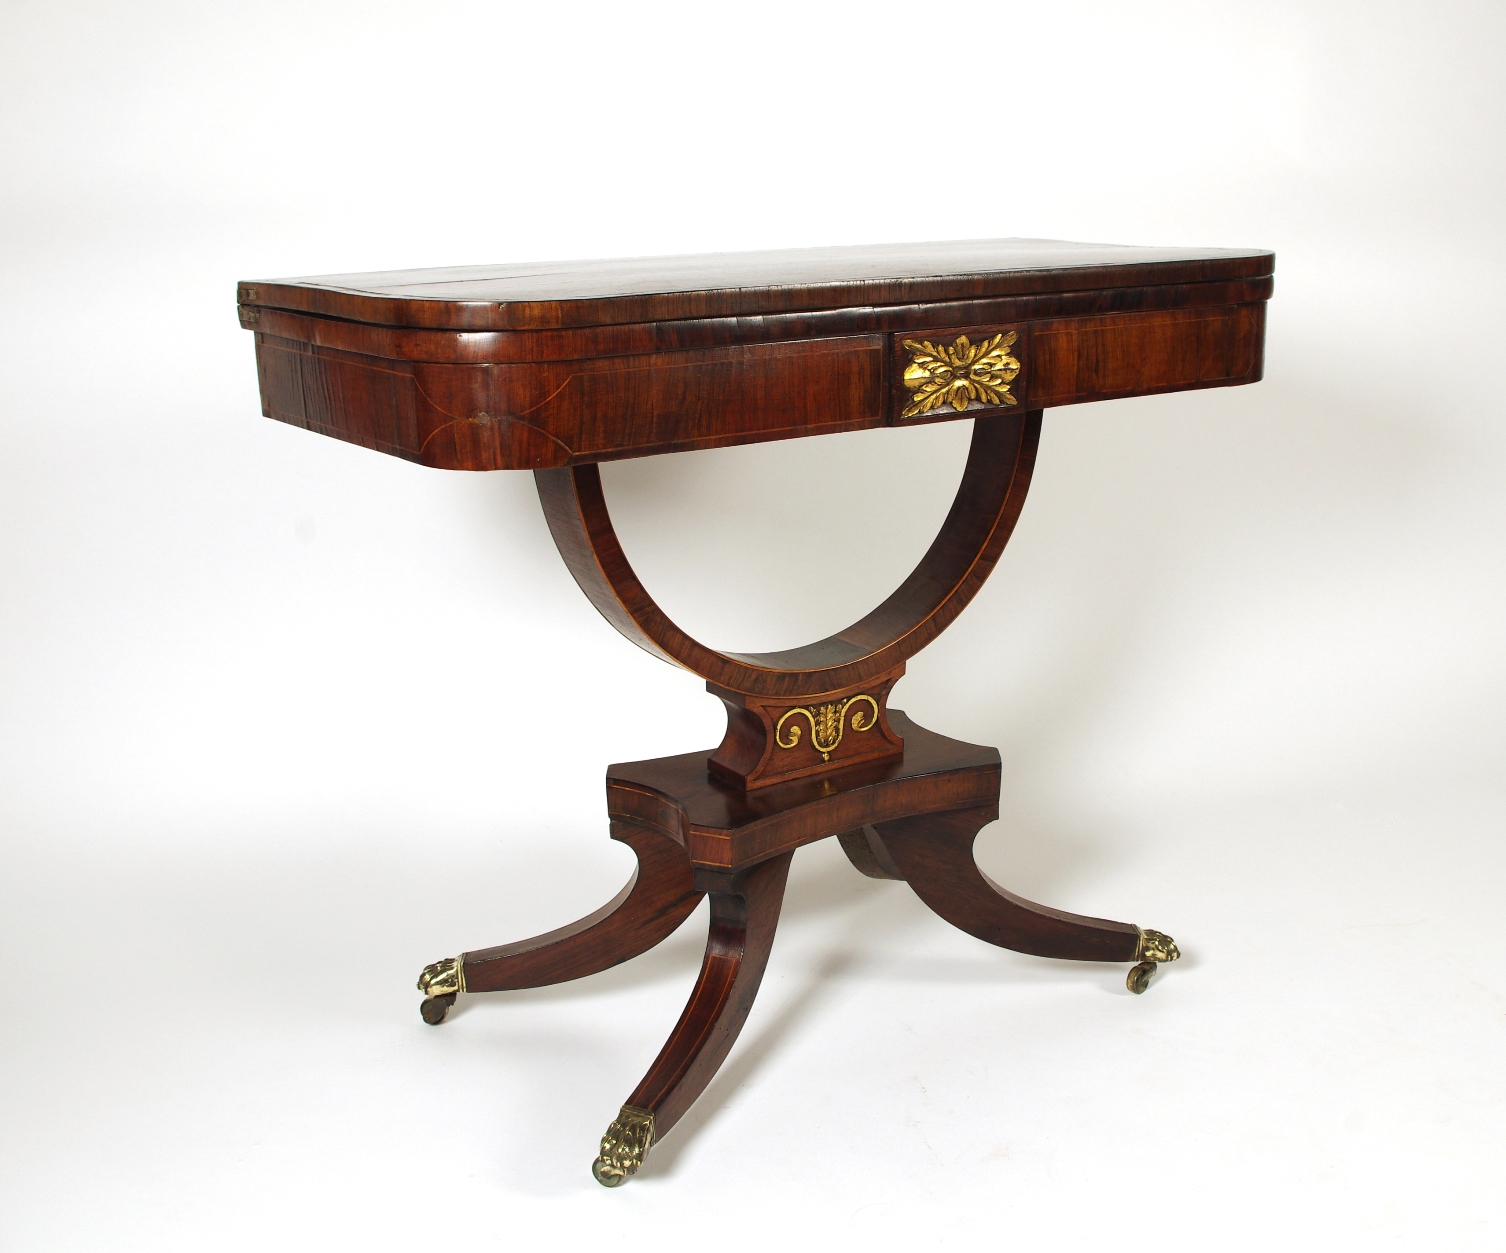 Regency Rosewood Card Table with Rare Palm Cross Banding